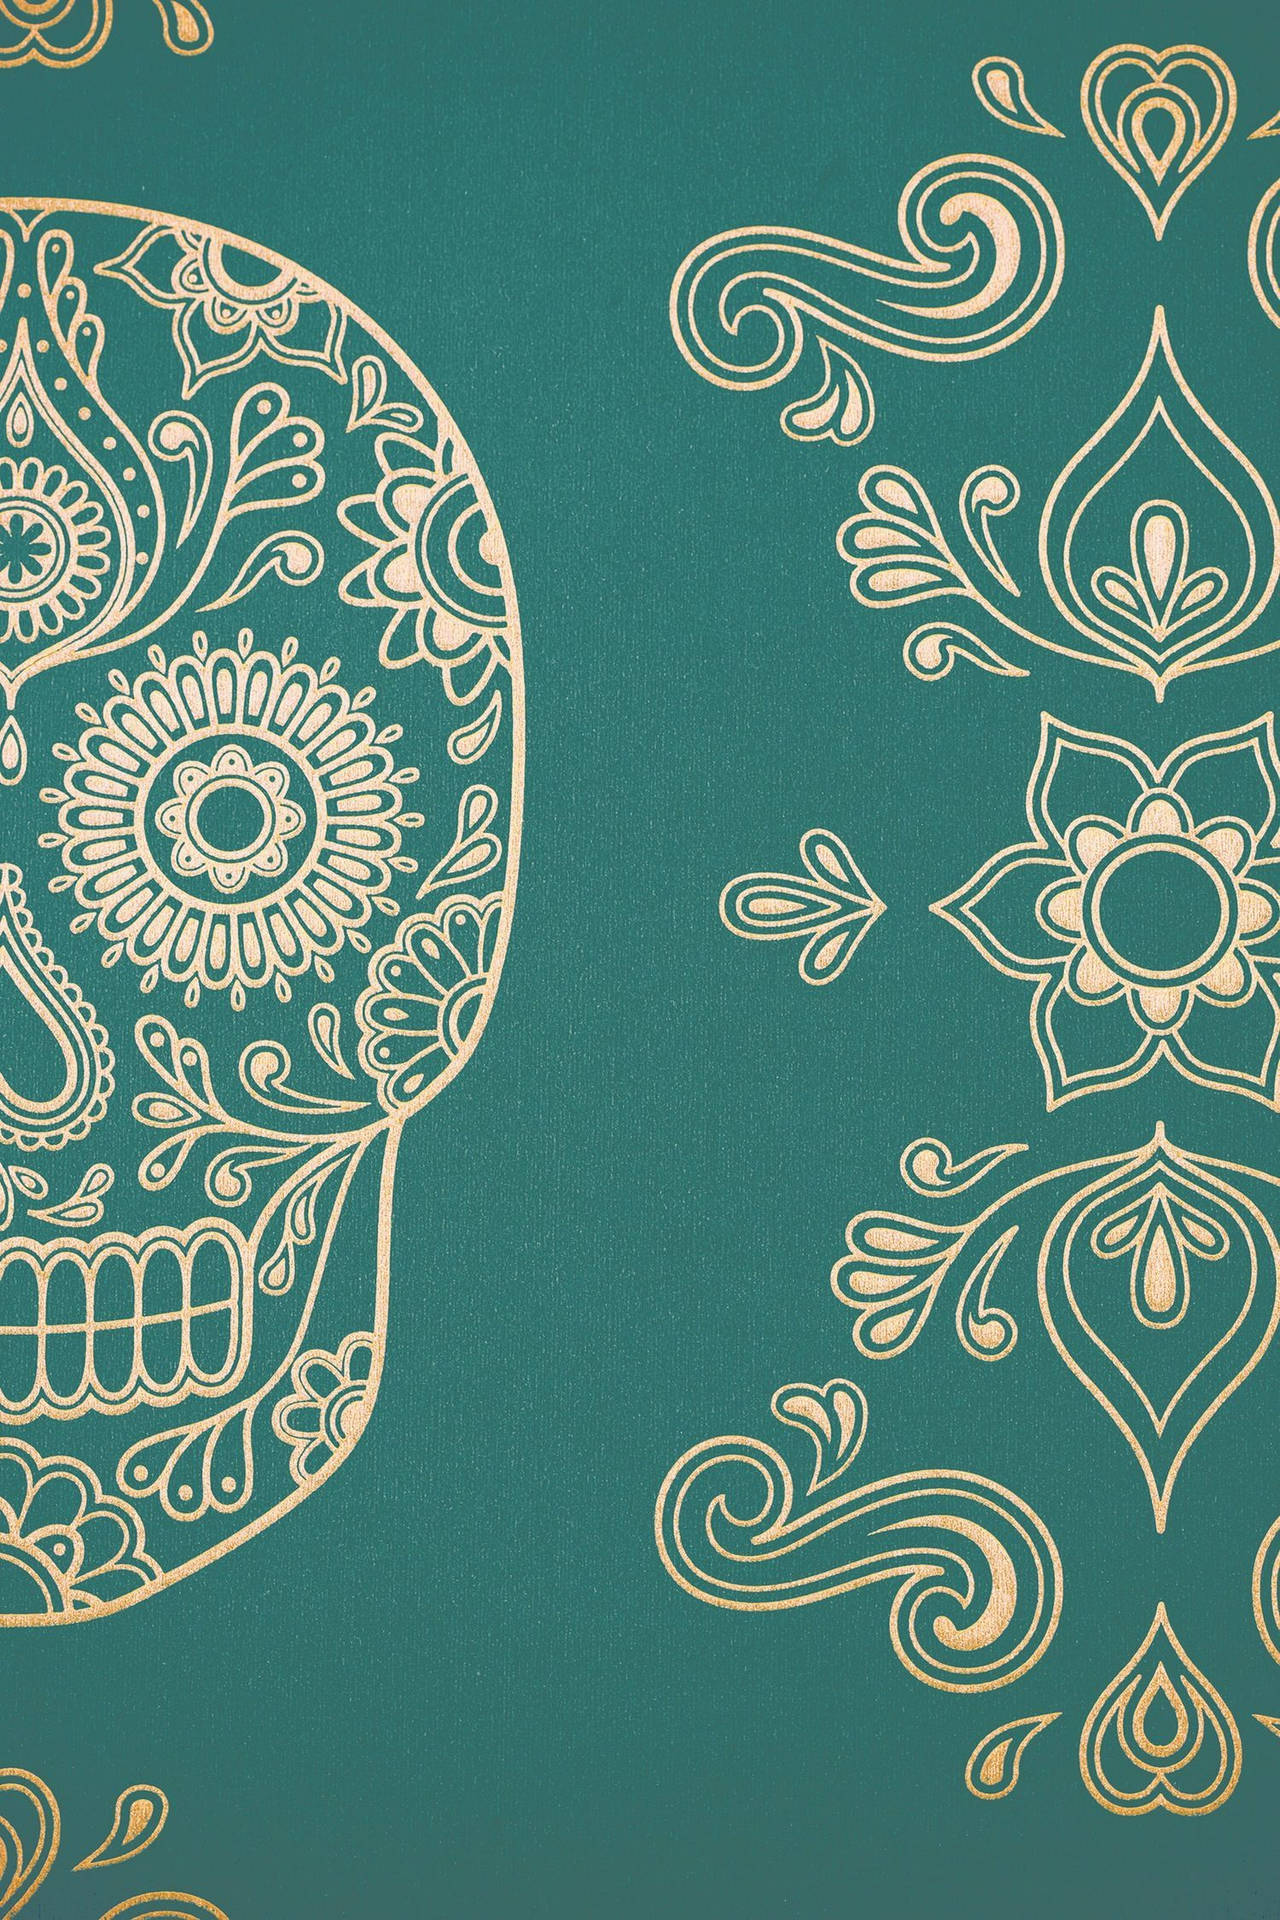 A Gold Sugar Skull On A Green Background Wallpaper